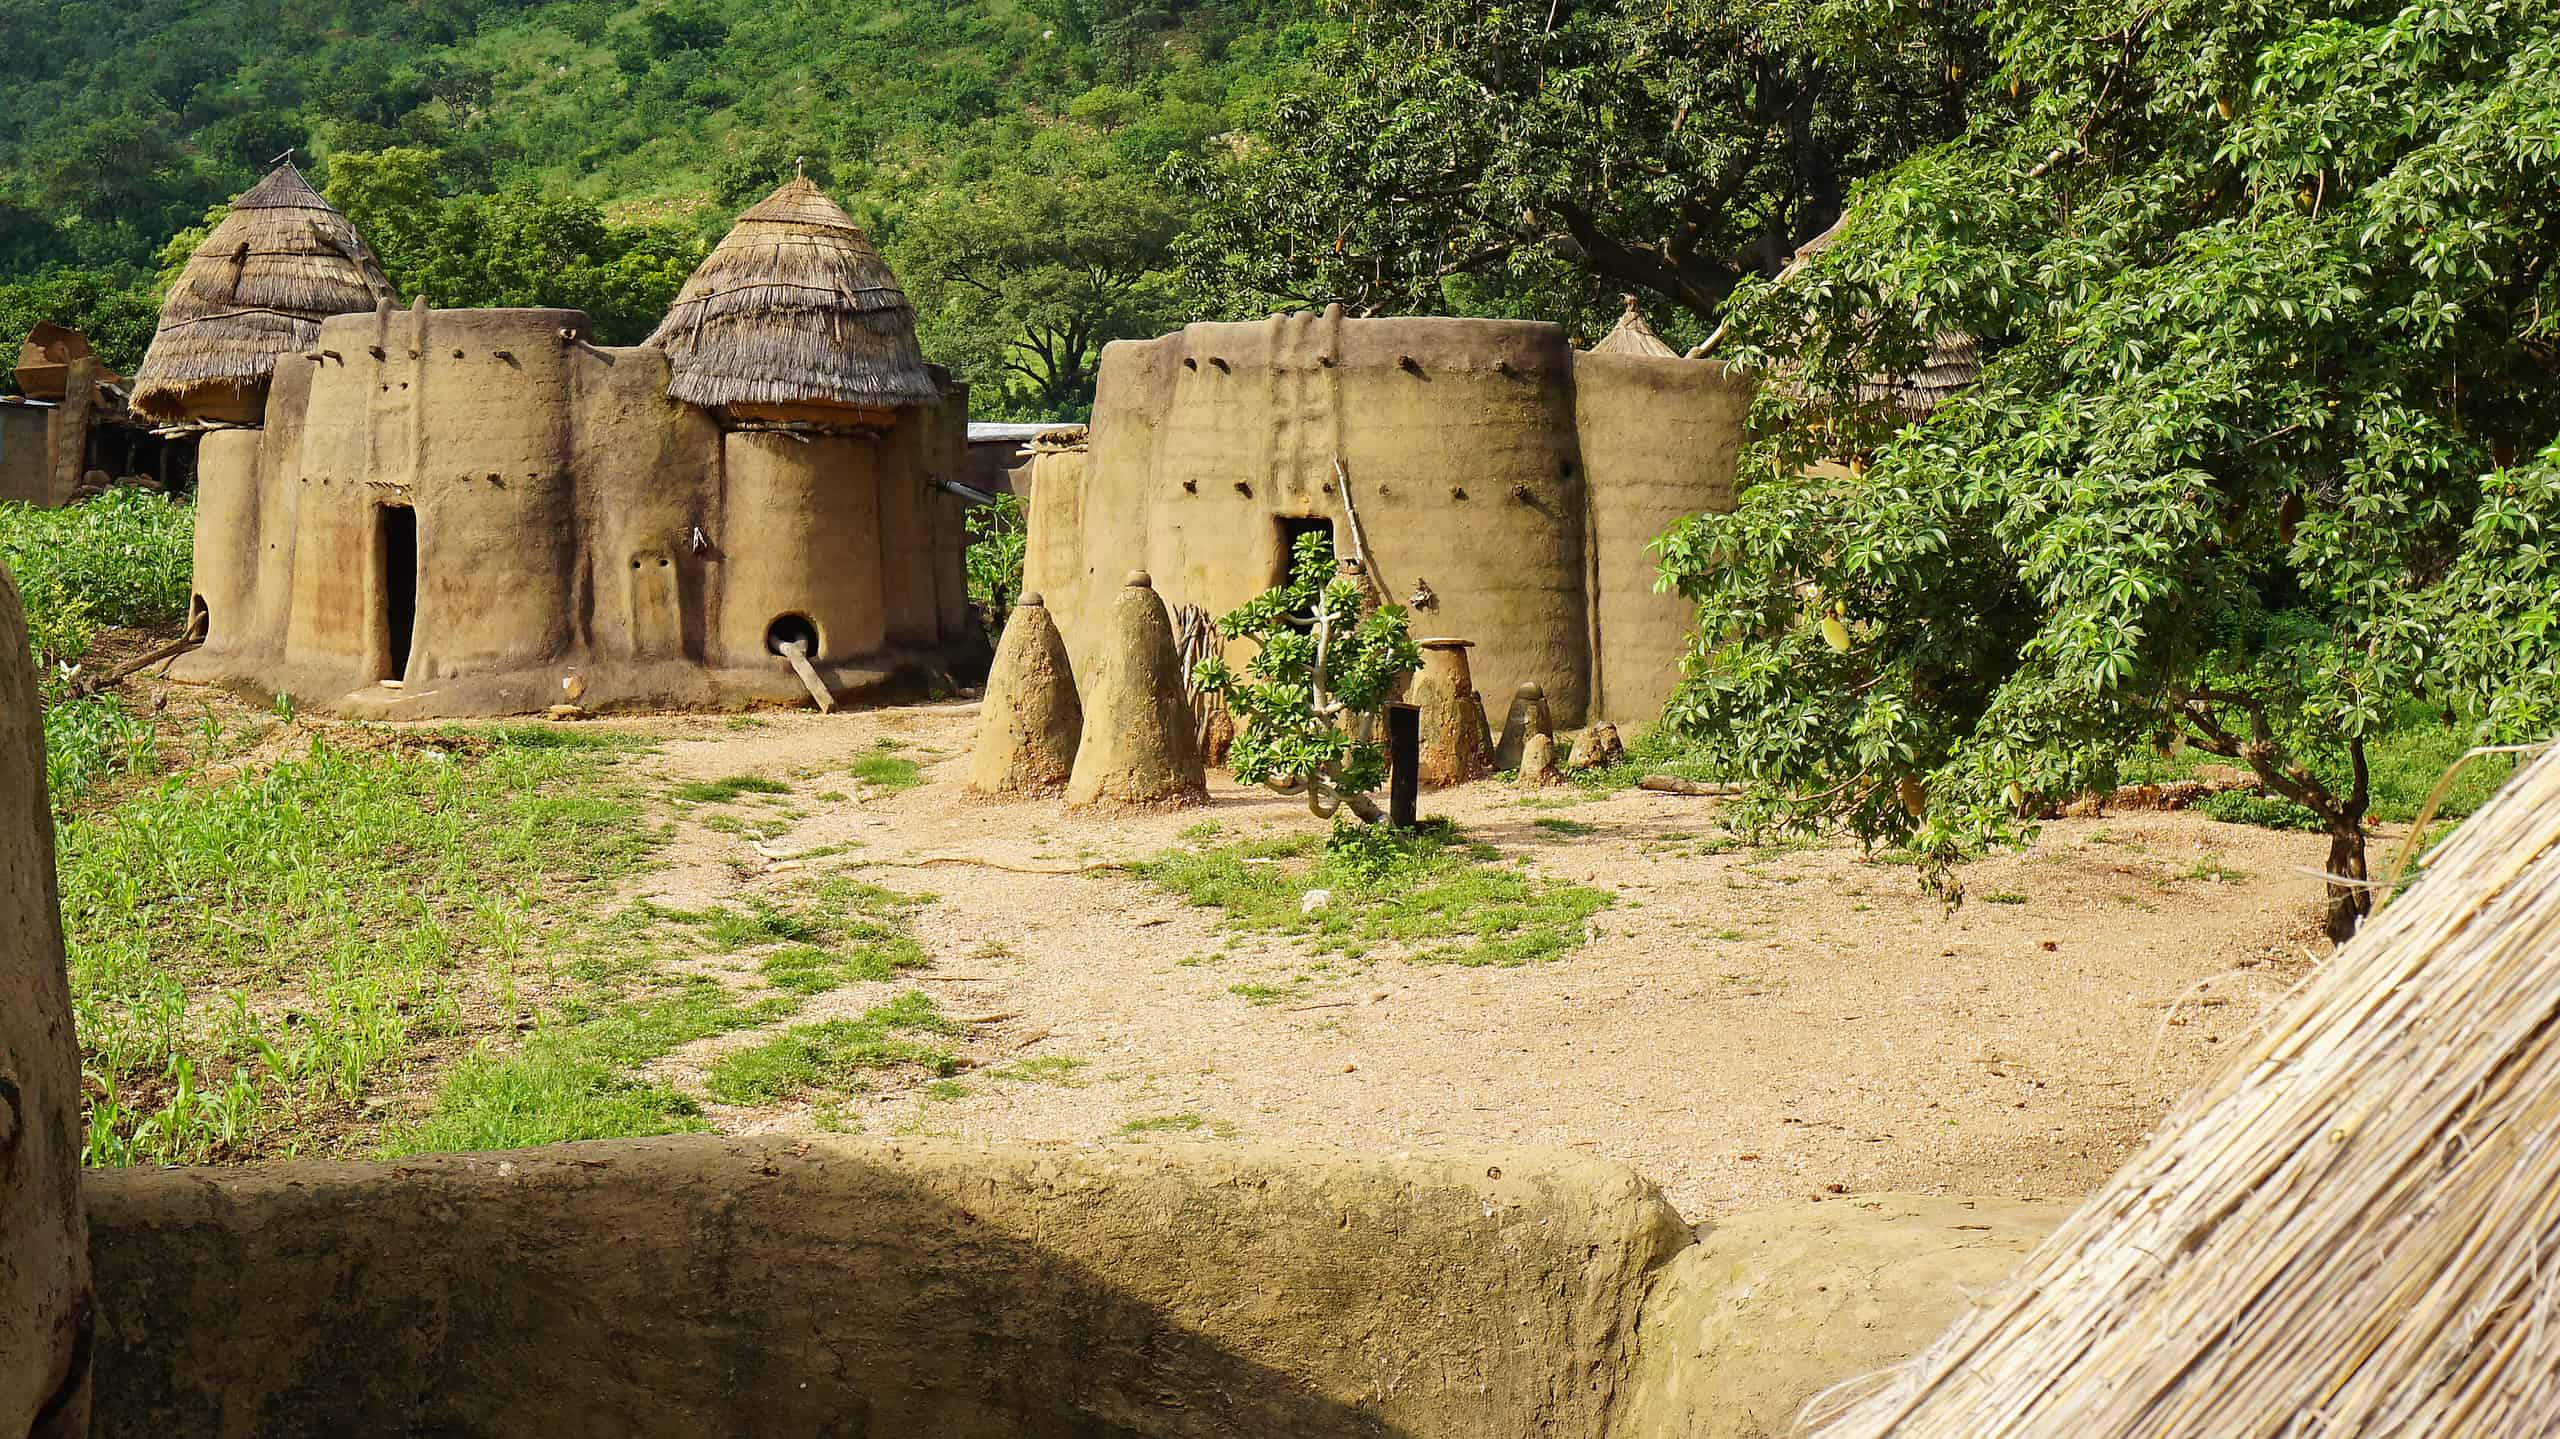 Landscape of Tamberma in togo is part of the unesco world heritage